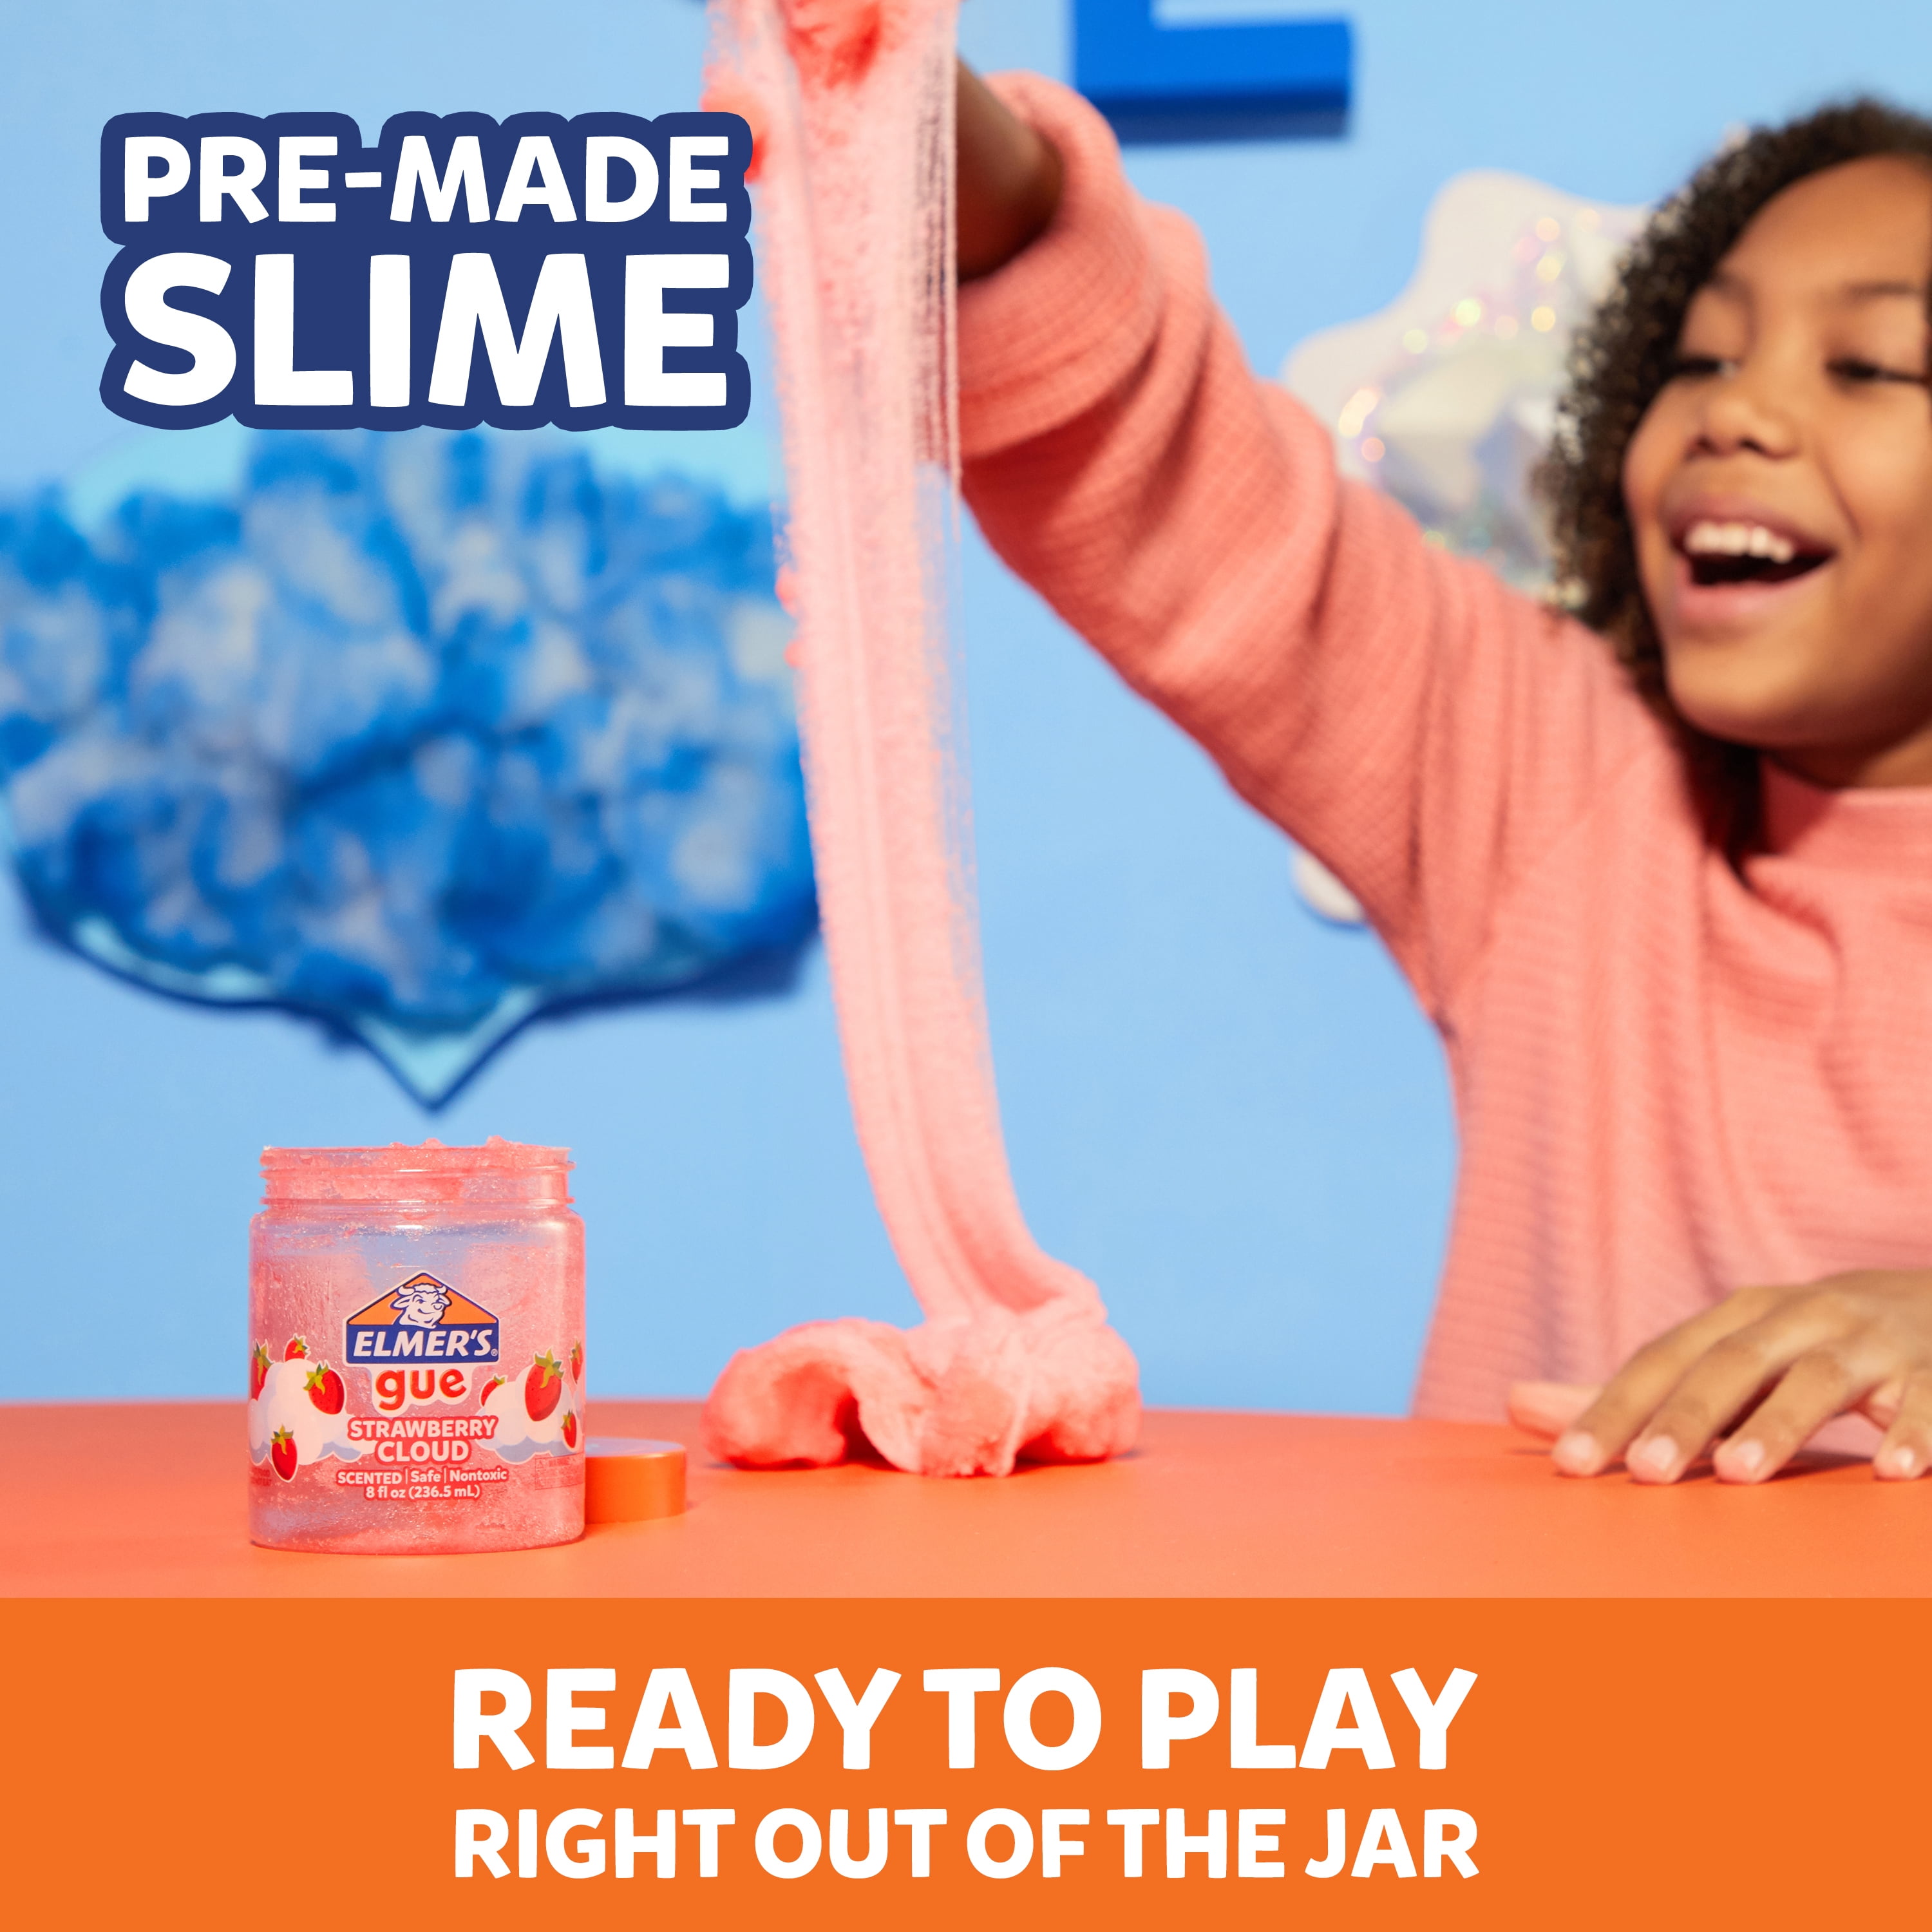 Elmers GUE Pre Made Slime Scented Strawberry Cloud Slime 2 Count 